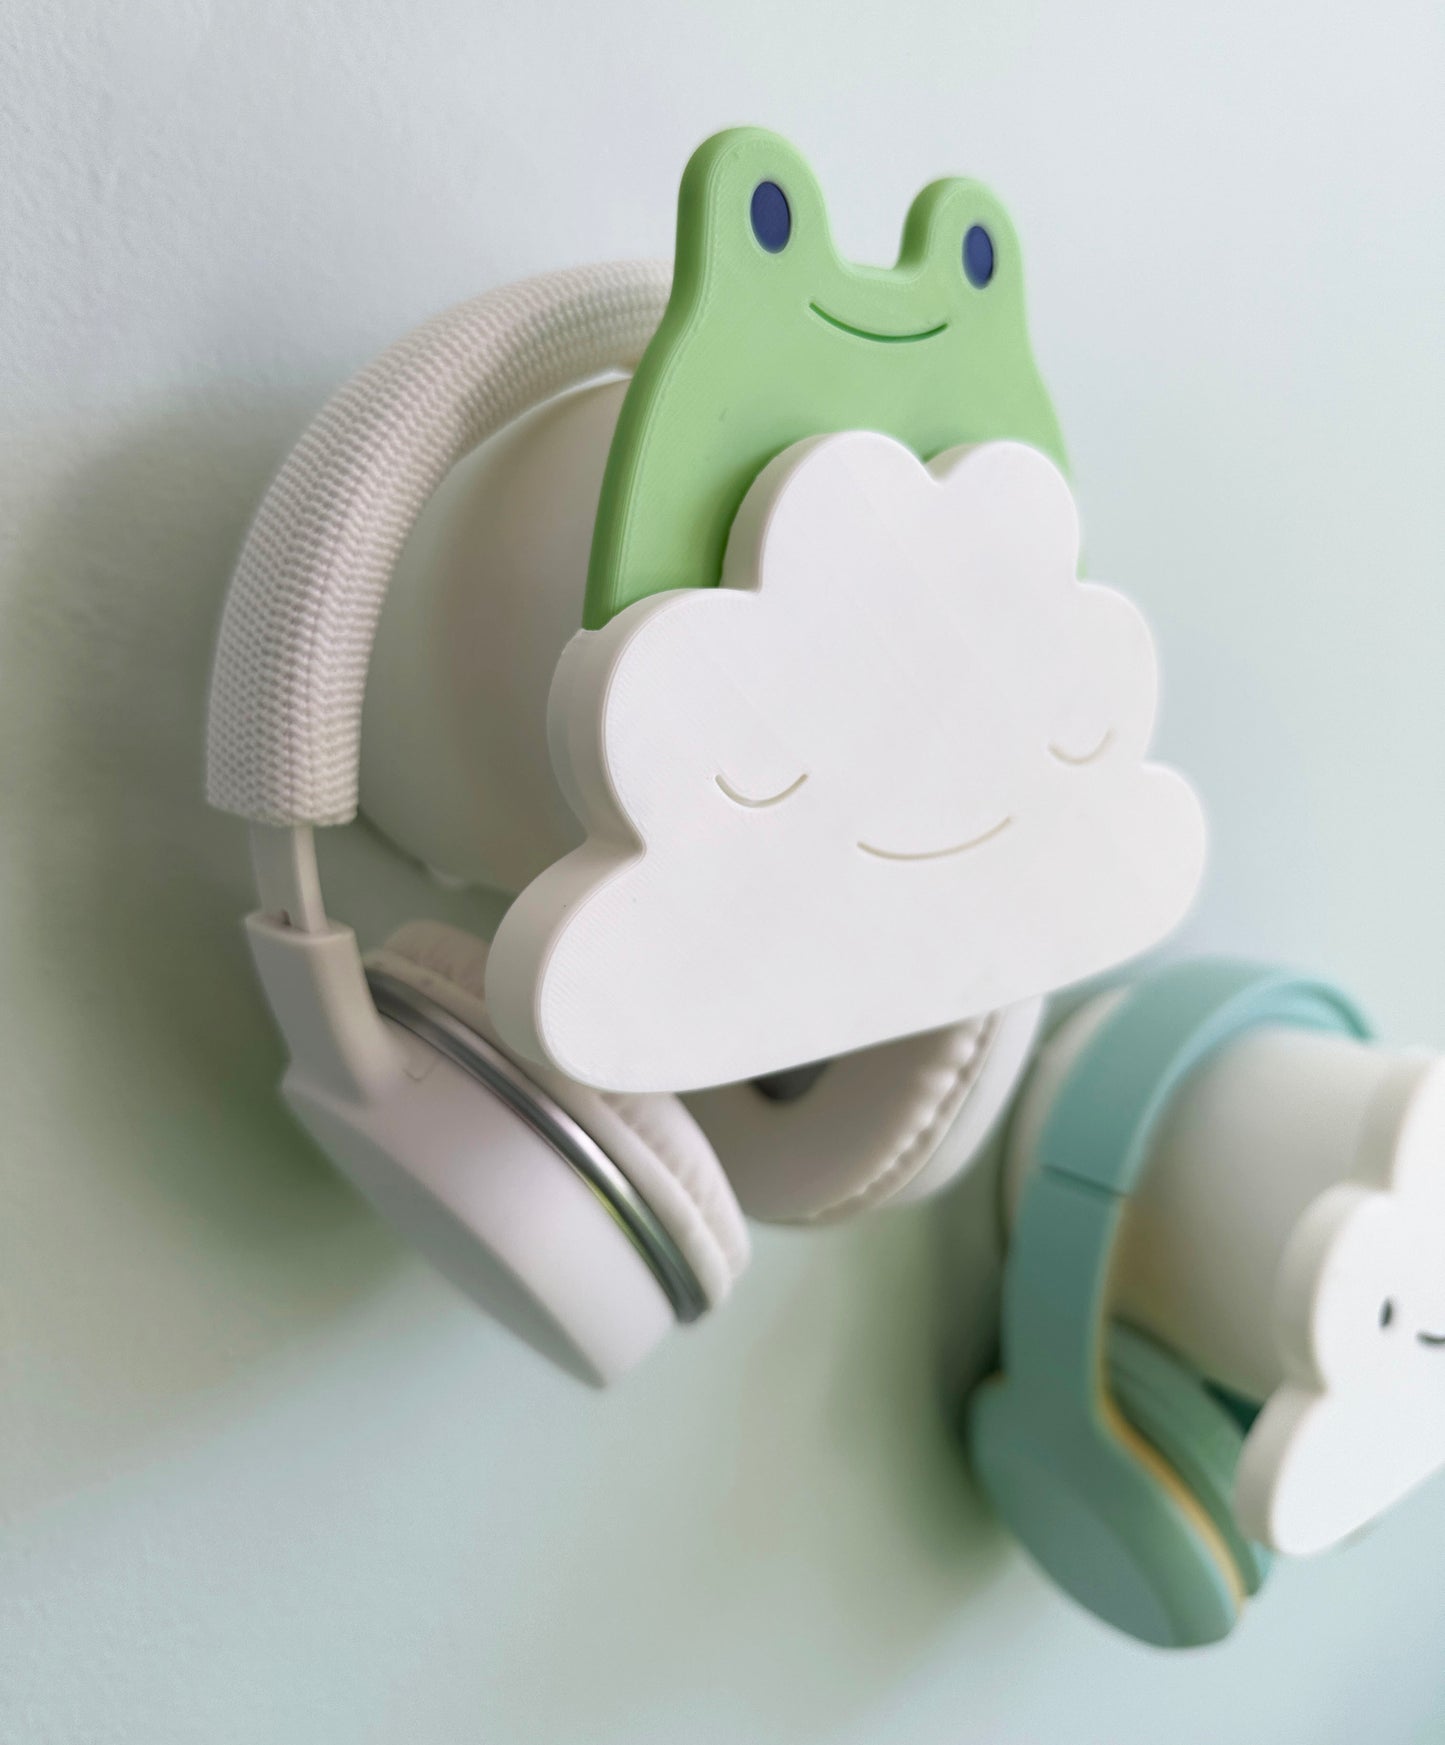 Judy Frog and Nimbo the Cloud, Headphone Holder Stand